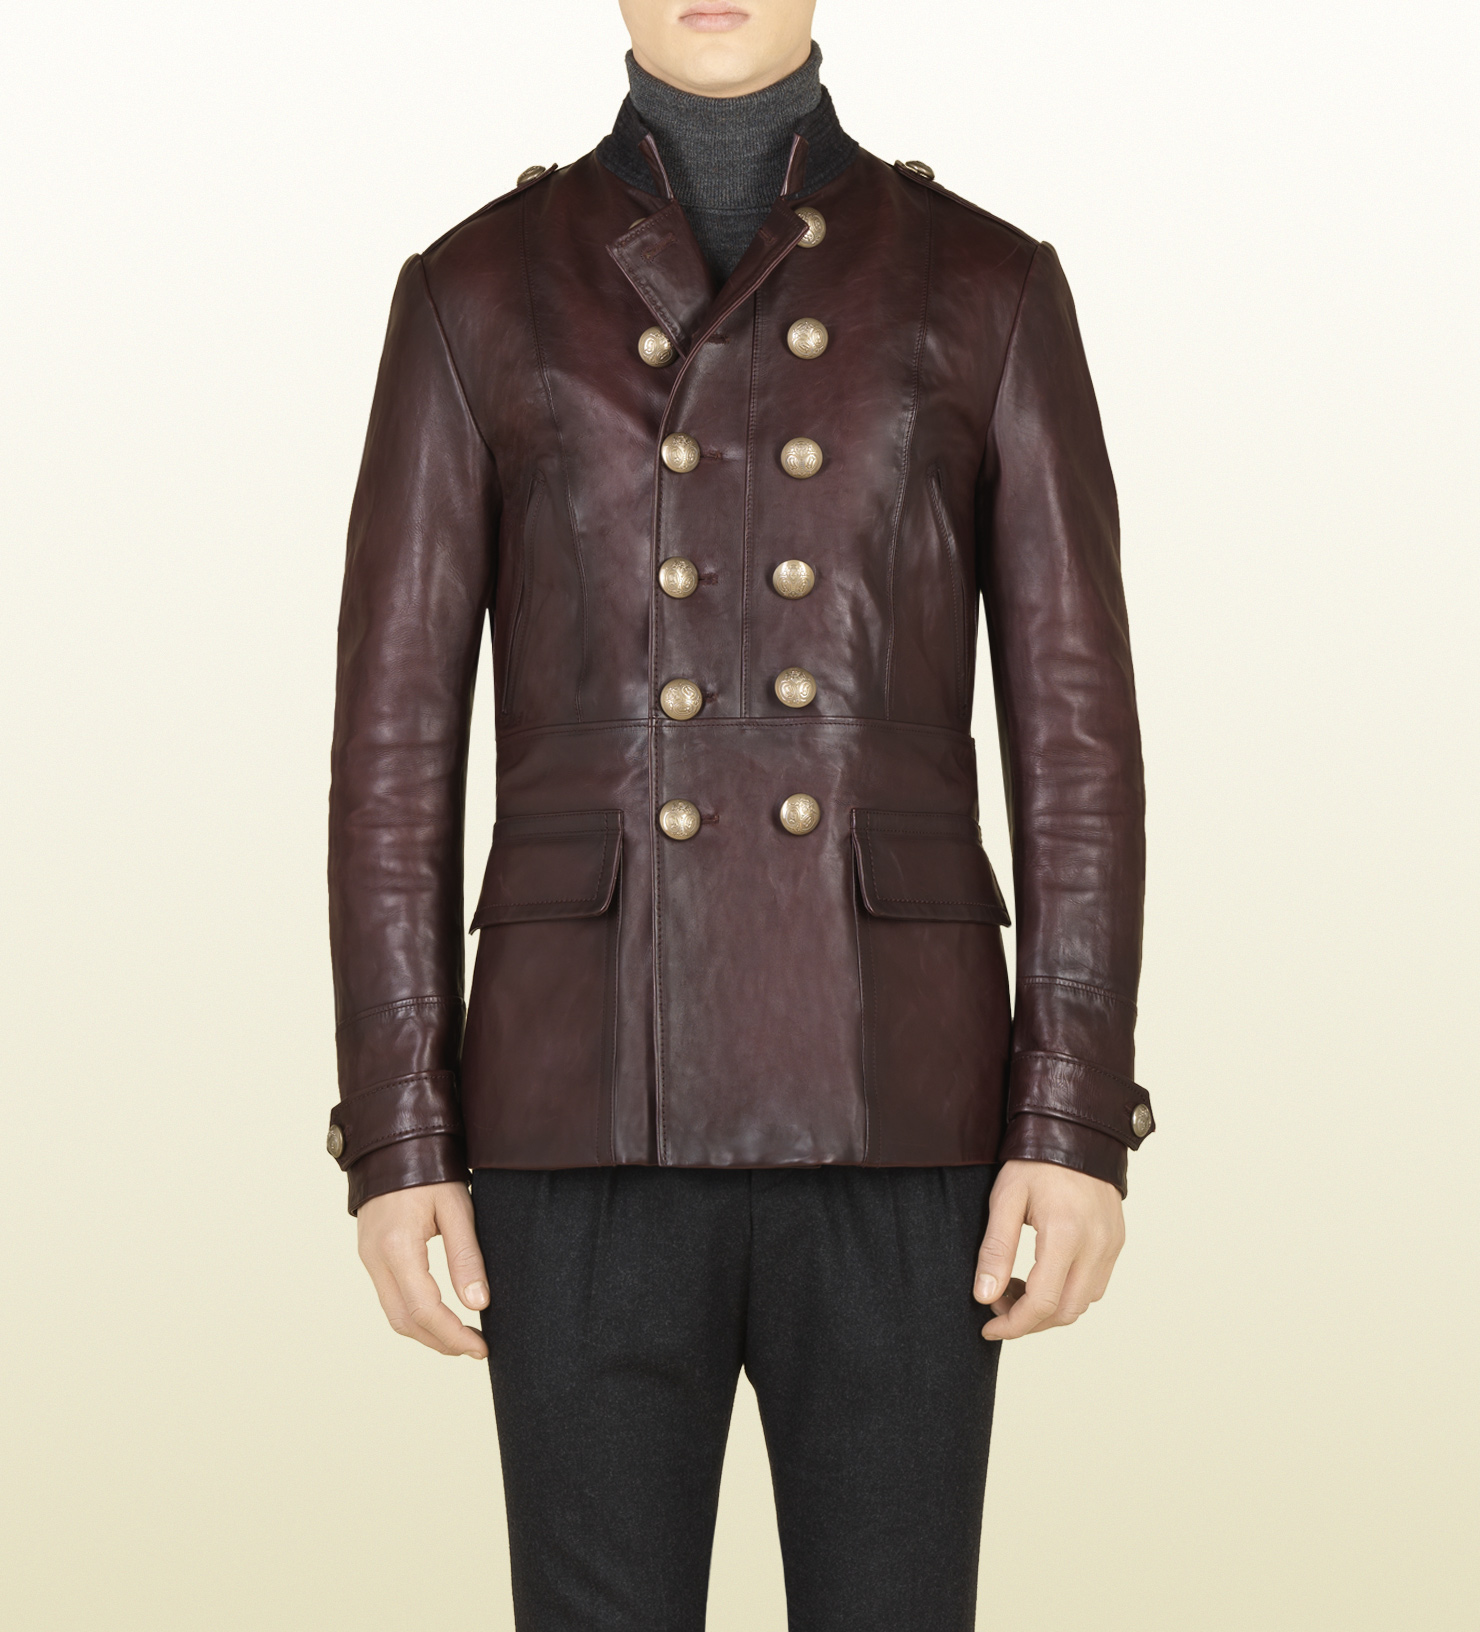 Lyst - Gucci Red Shiny Leather Jacket in Red for Men